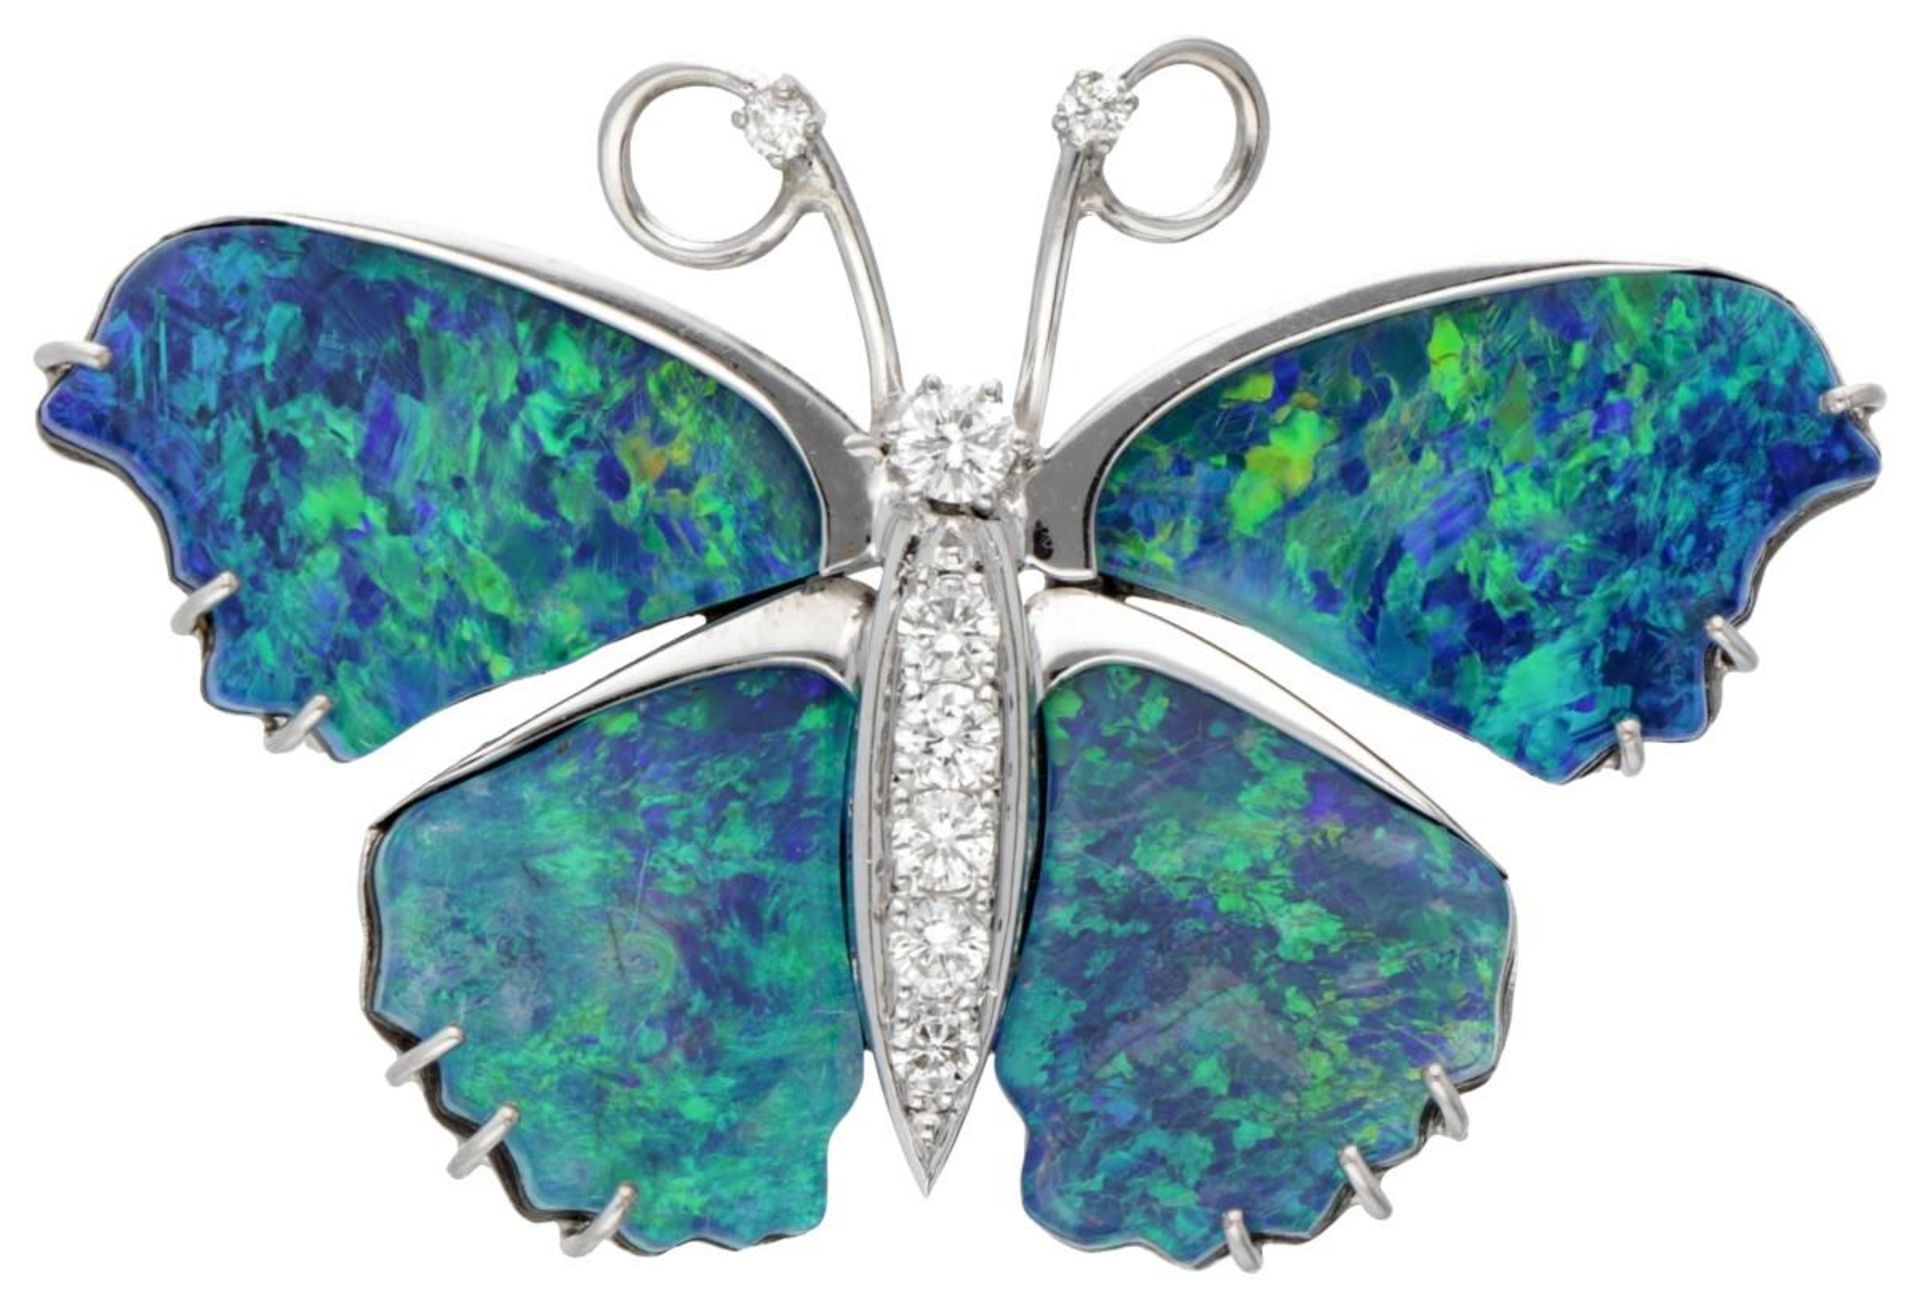 14K. White gold butterfly brooch set with approx. 0.50 ct. diamond and opal doublet. - Image 2 of 6